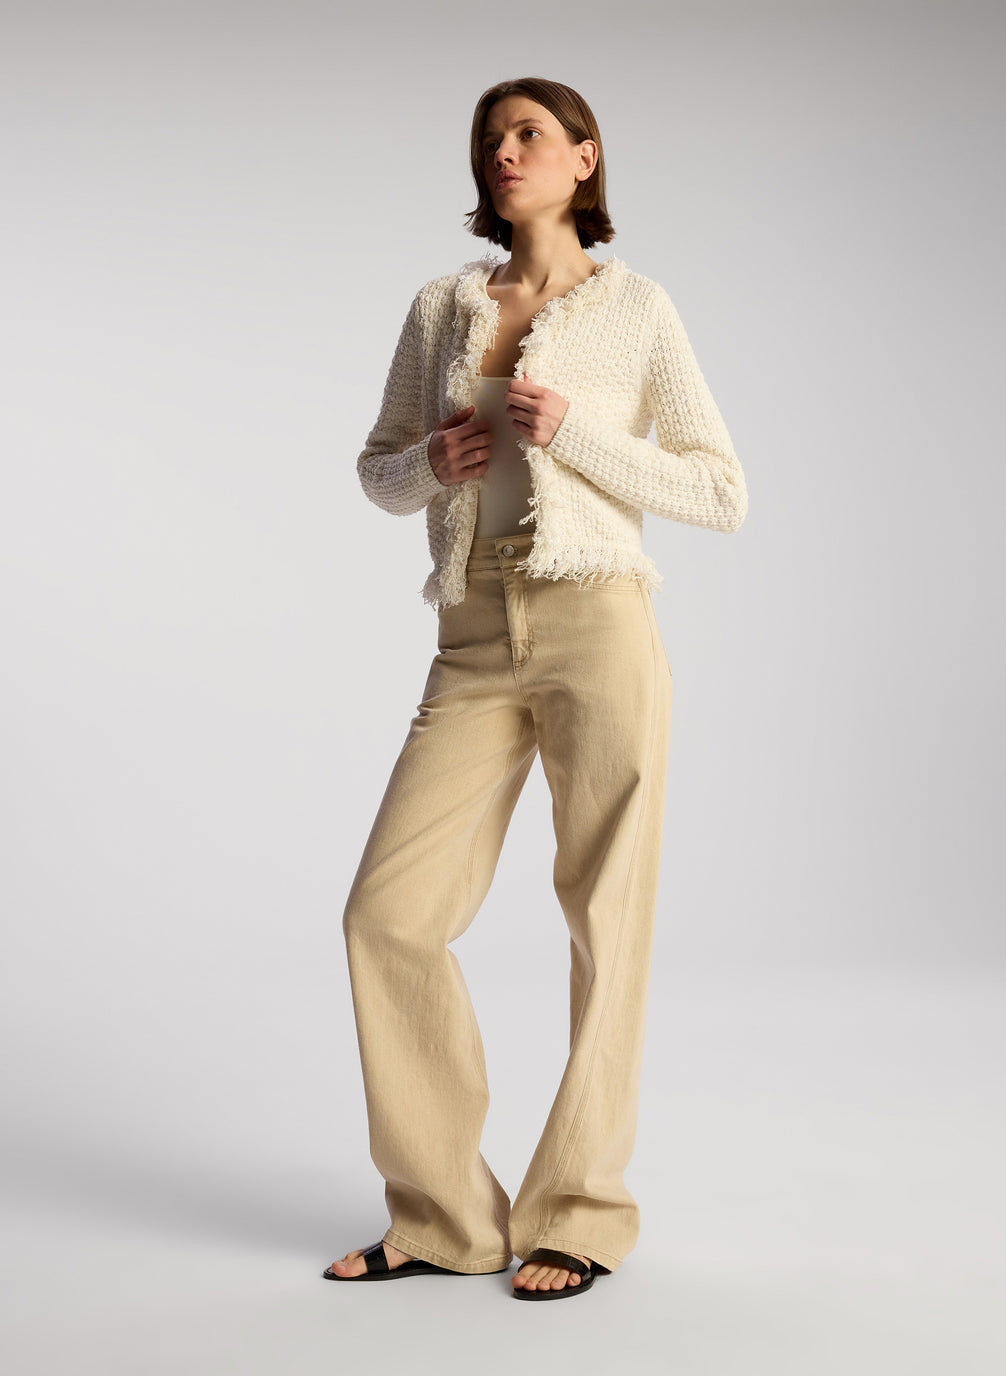 side view of woman wearing cream fringed cardigan and tan pants